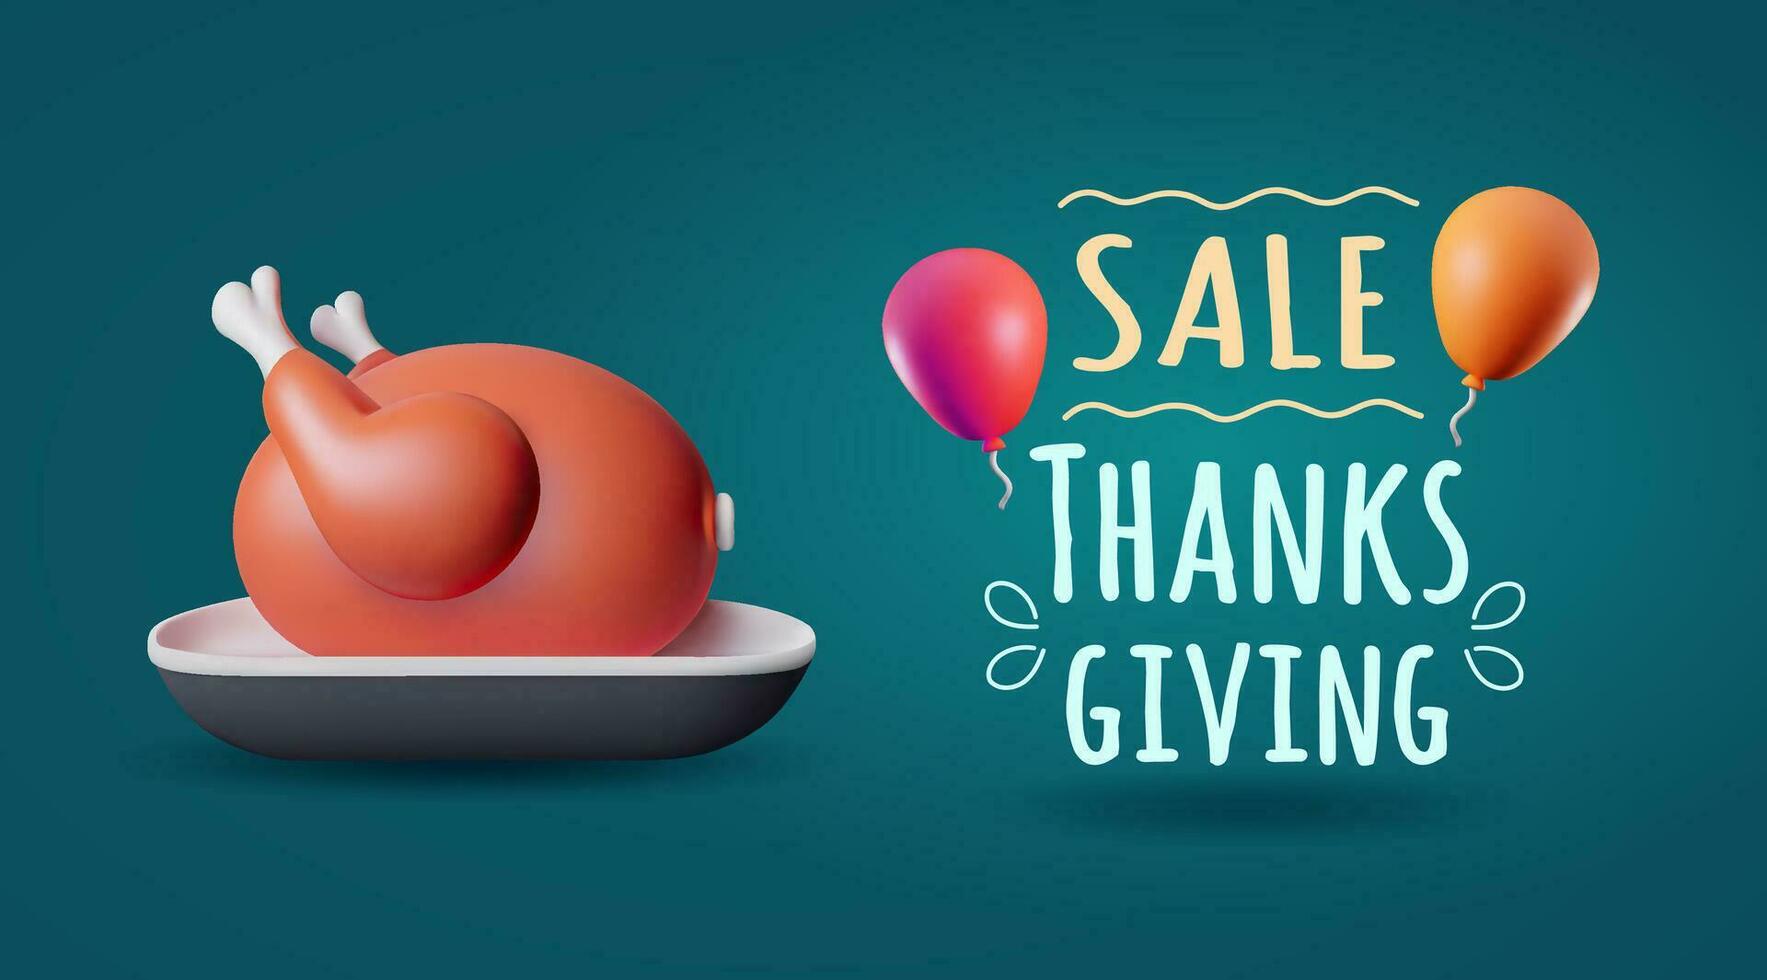 Thanksgiving sale banner with 3d roast turkey on a dish and air balloons. 3d stylized vector illustration for sale event